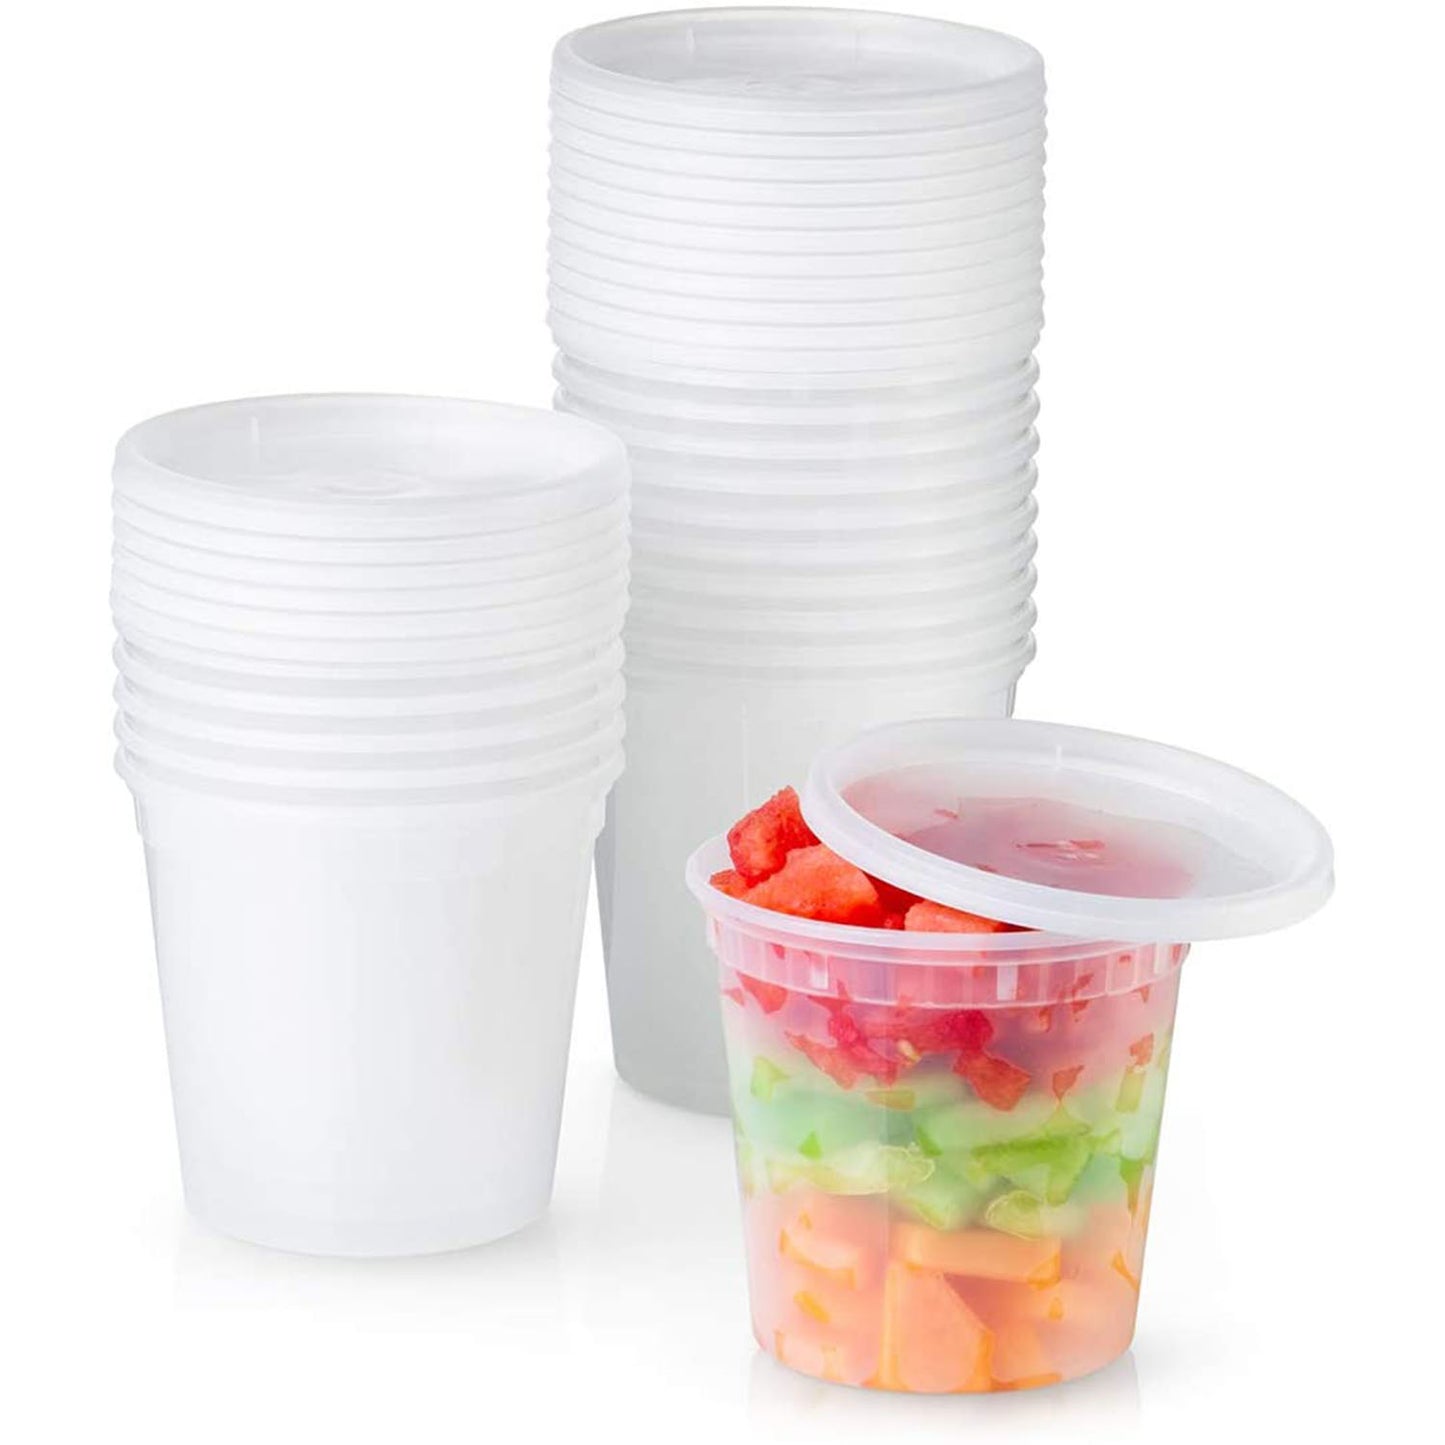 Heavy Deli Container and Lid, 48 sets – Zakarin Paper Goods